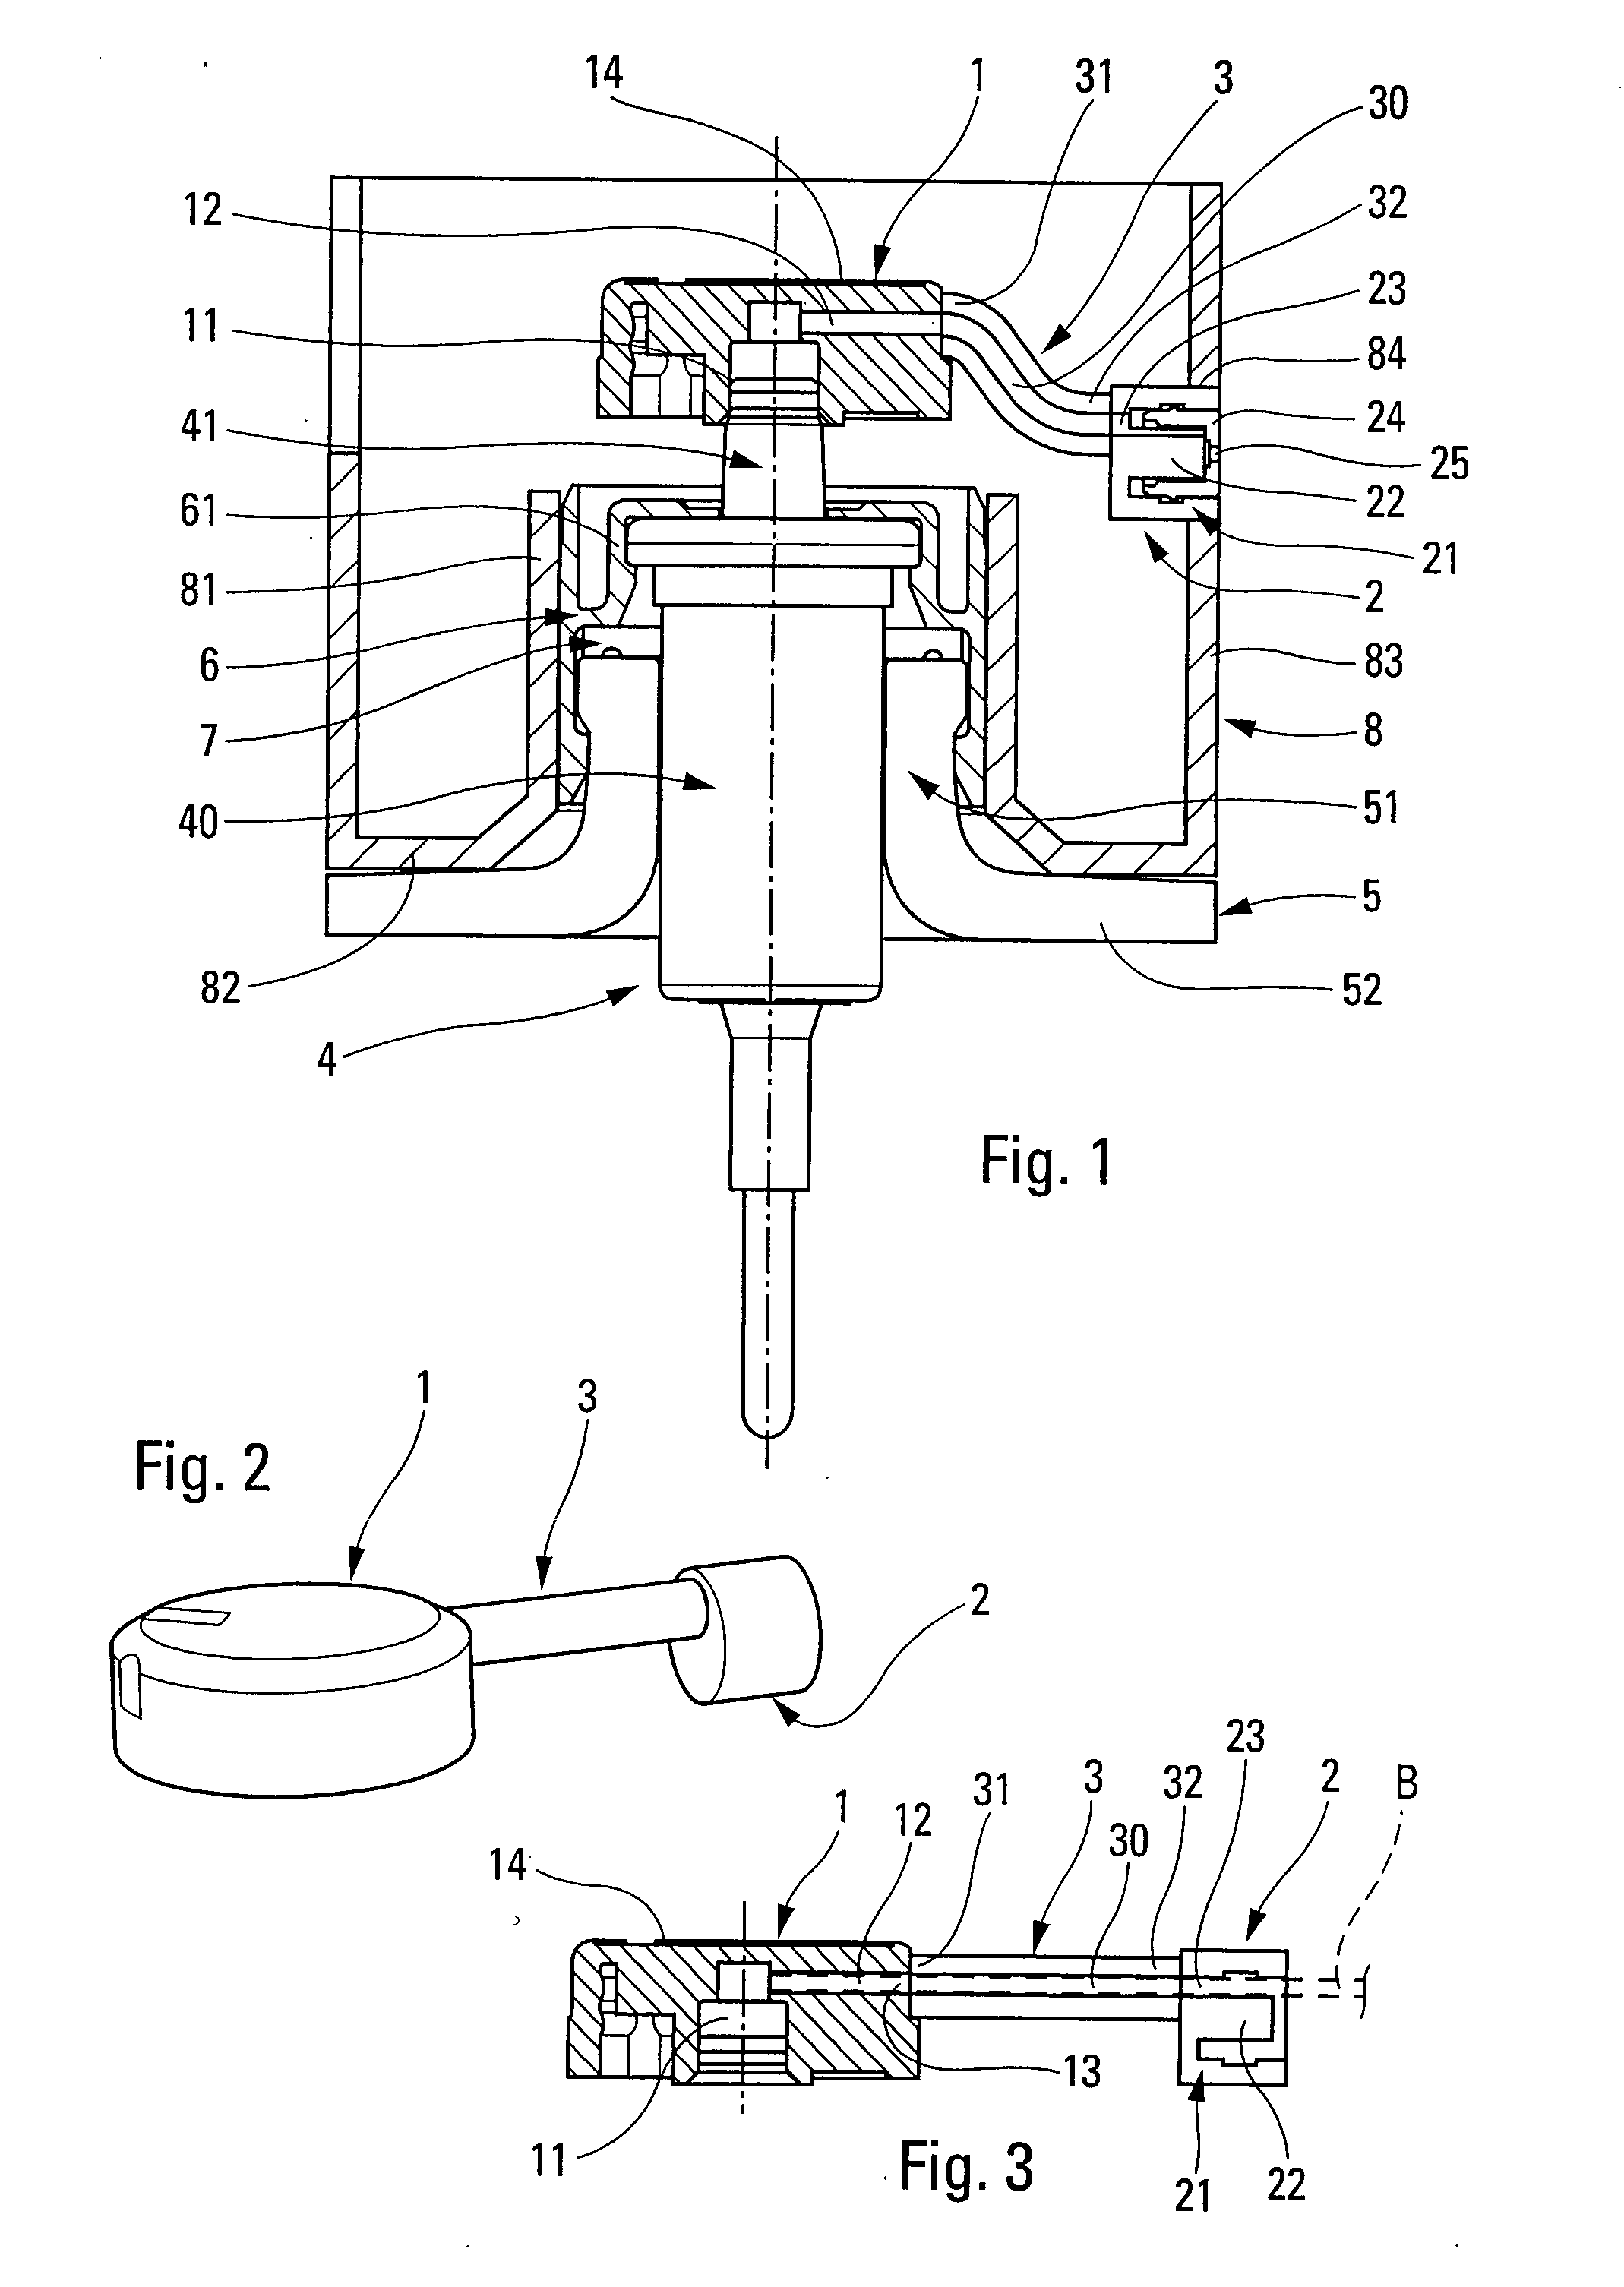 Fluid dispenser head, a dispenser including such a head, and a method of manufacturing such a head